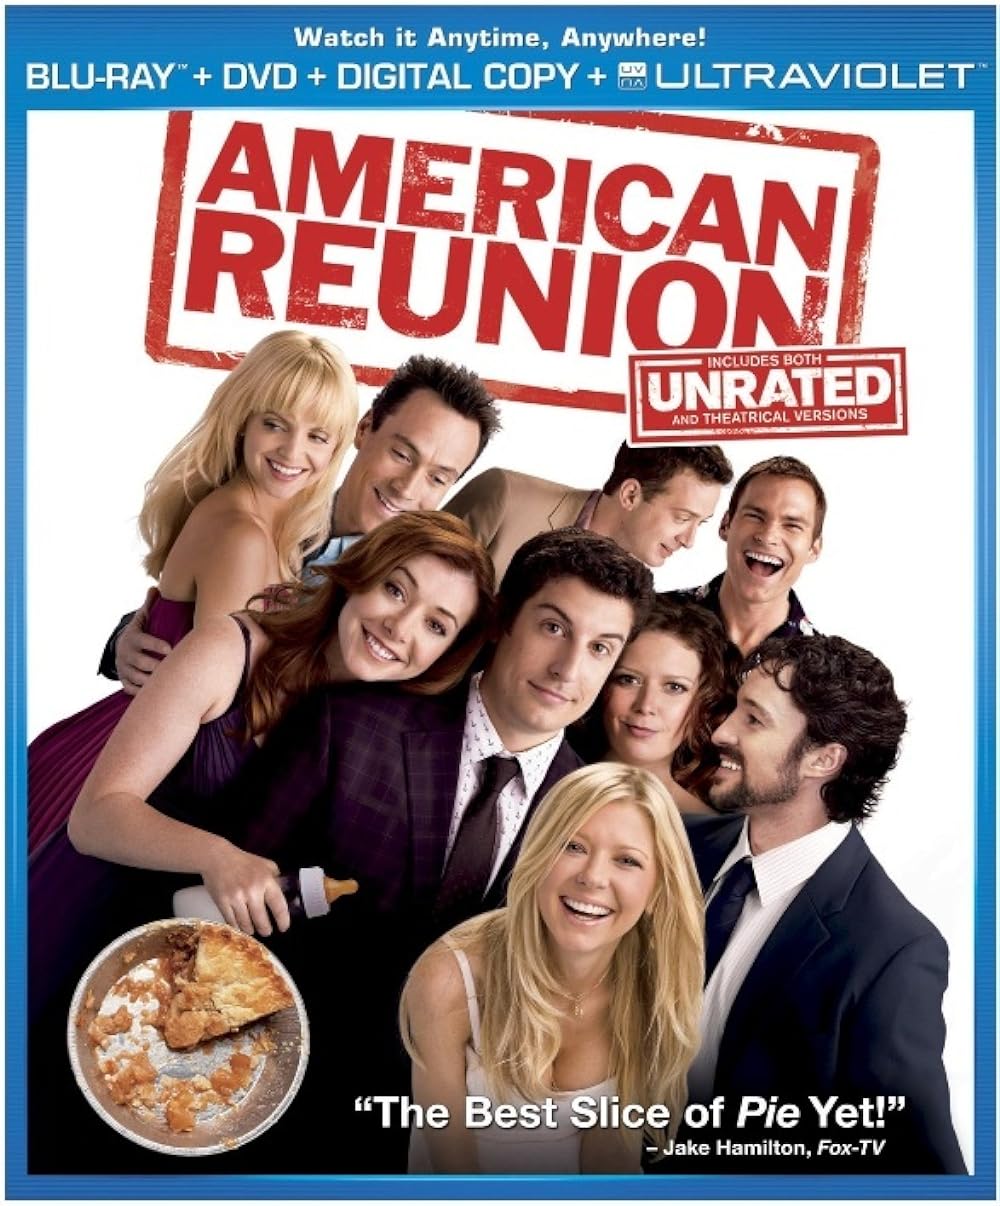 American Reunion (2012) Unrated Cut 448Kbps 23.976Fps 48Khz 5.1Ch BluRay Turkish Audio TAC